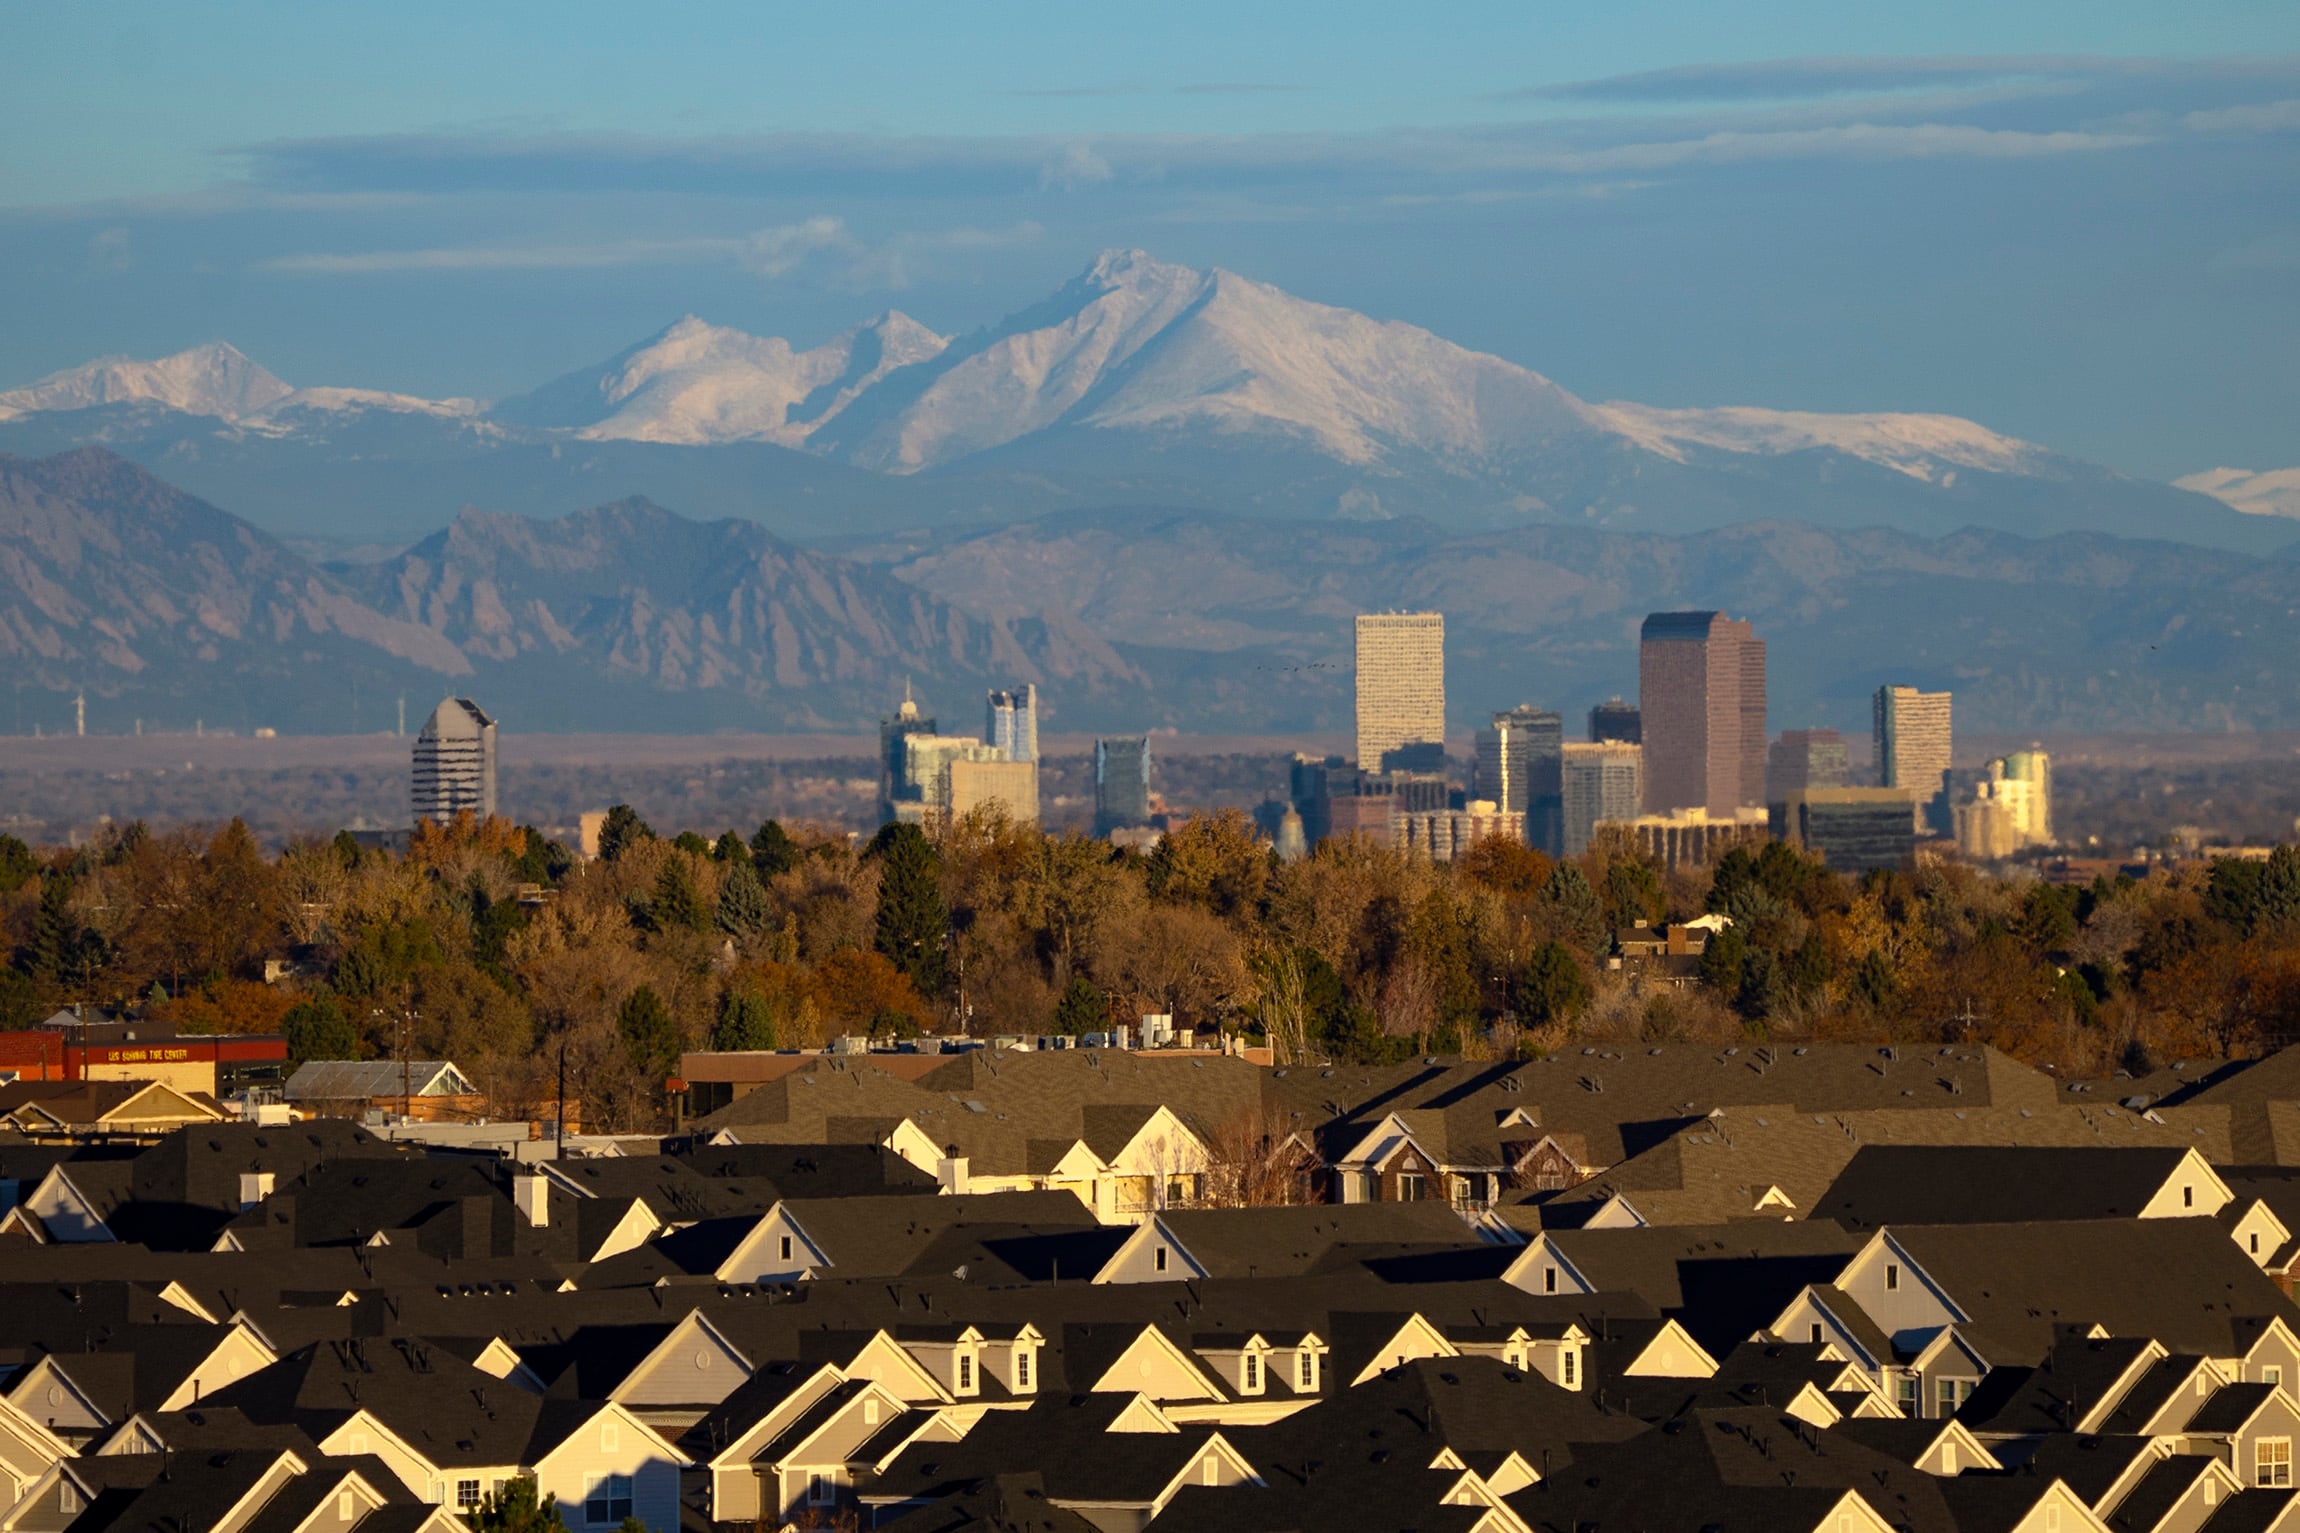 Mountains rise above the Denver skyline. In the foreground are the rooftops of residential development.